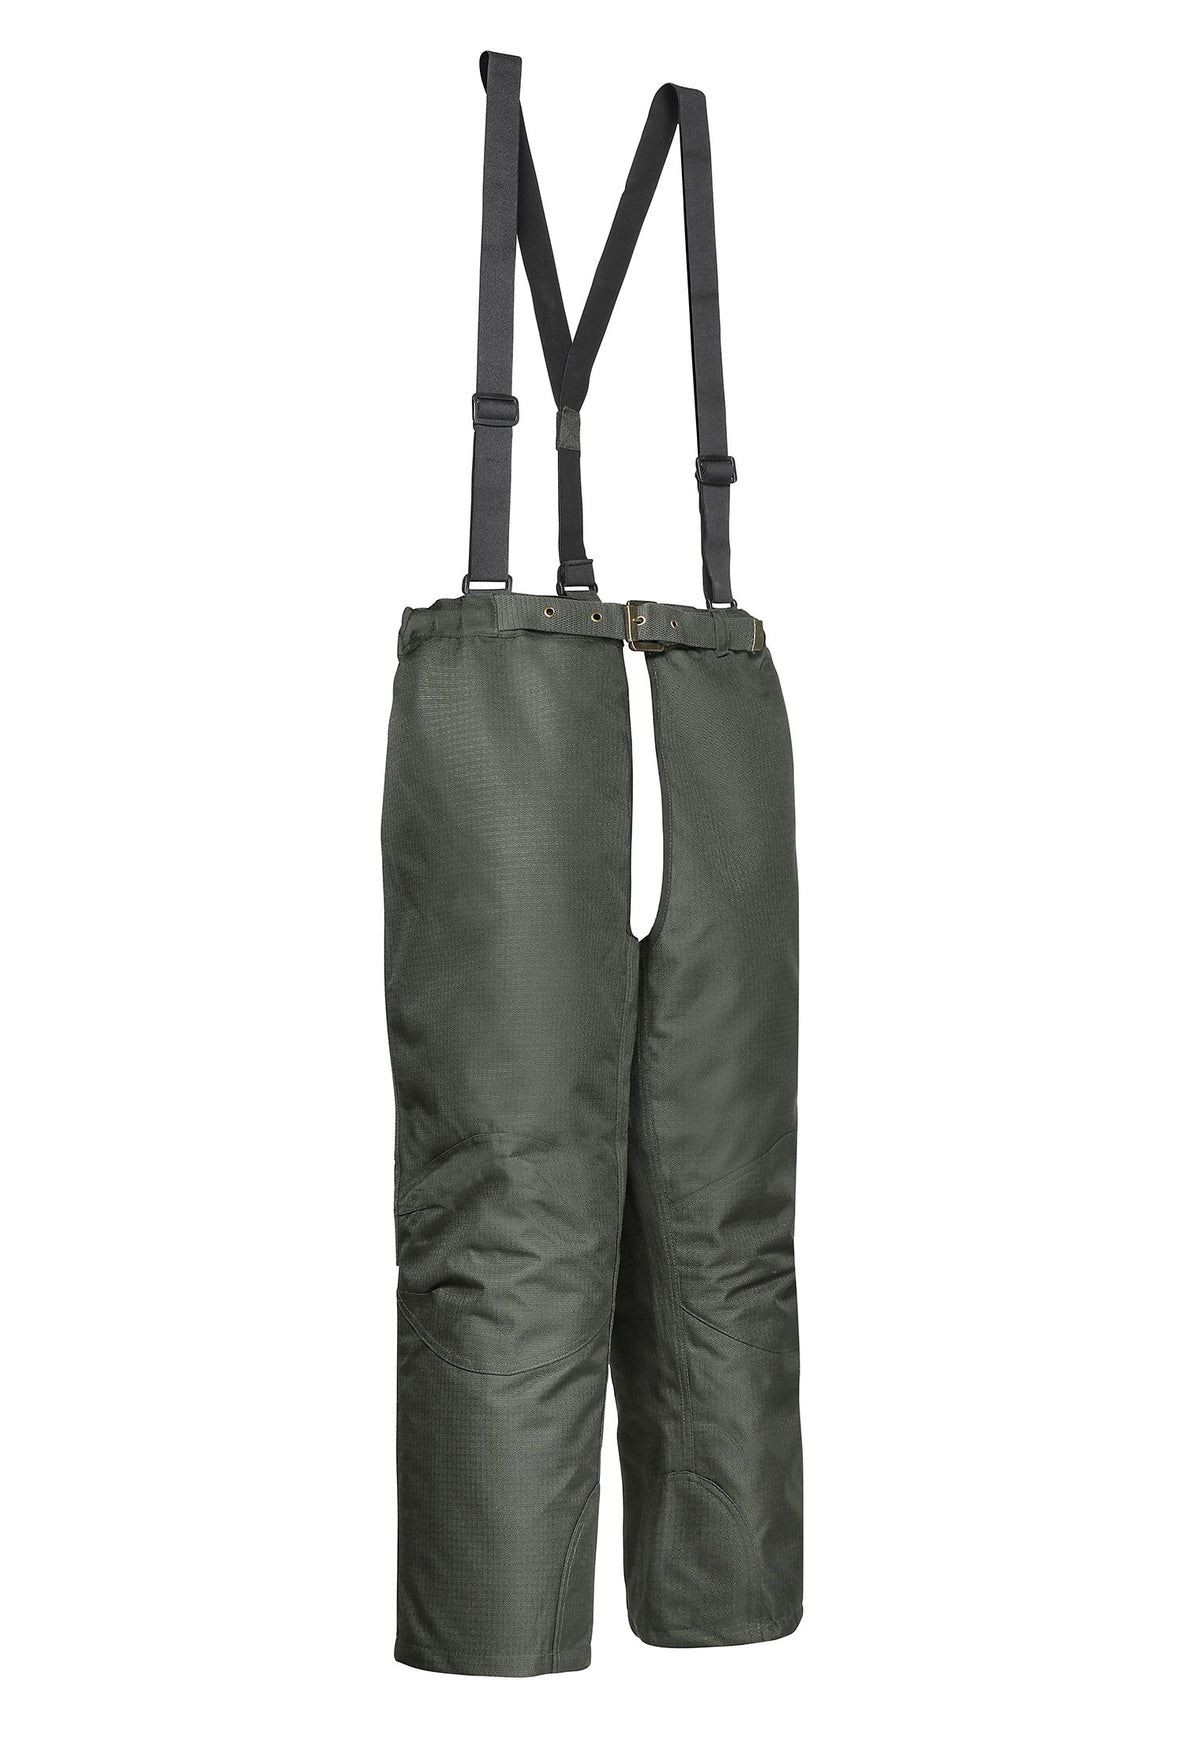 Percussion Stronger Waterproof Chaps with Braces - Hollands Country Clothing